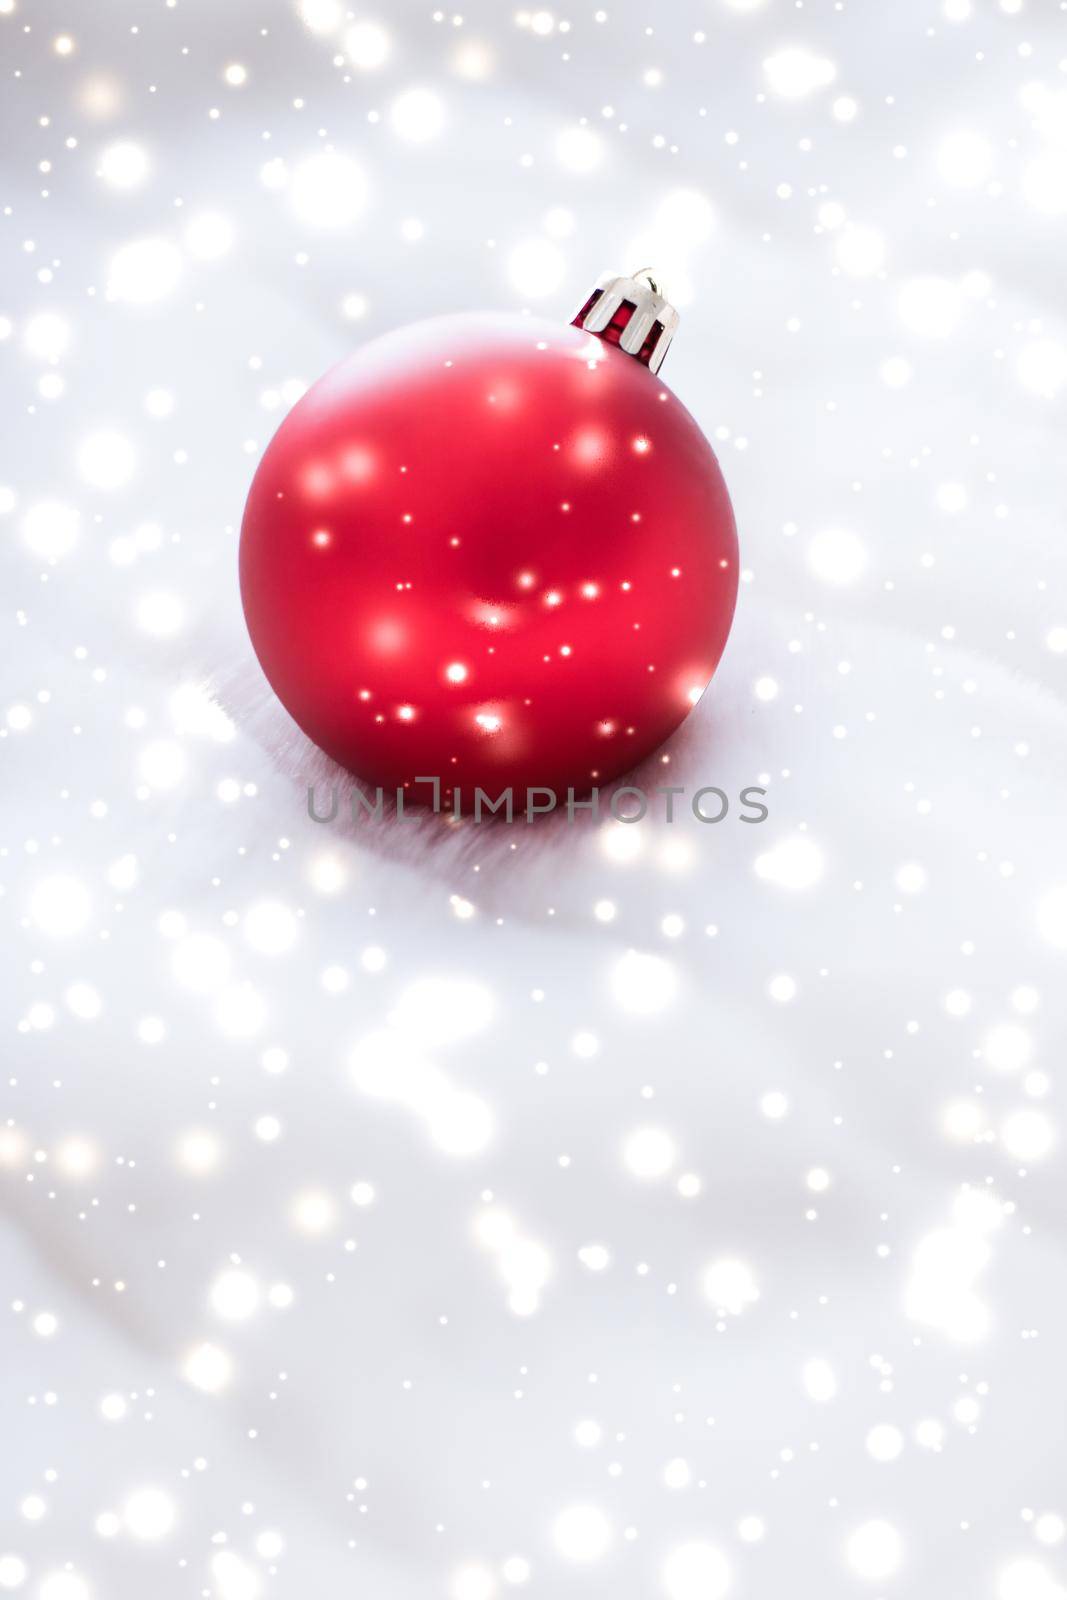 Red Christmas baubles on fluffy fur with snow glitter, luxury winter holiday design background by Anneleven